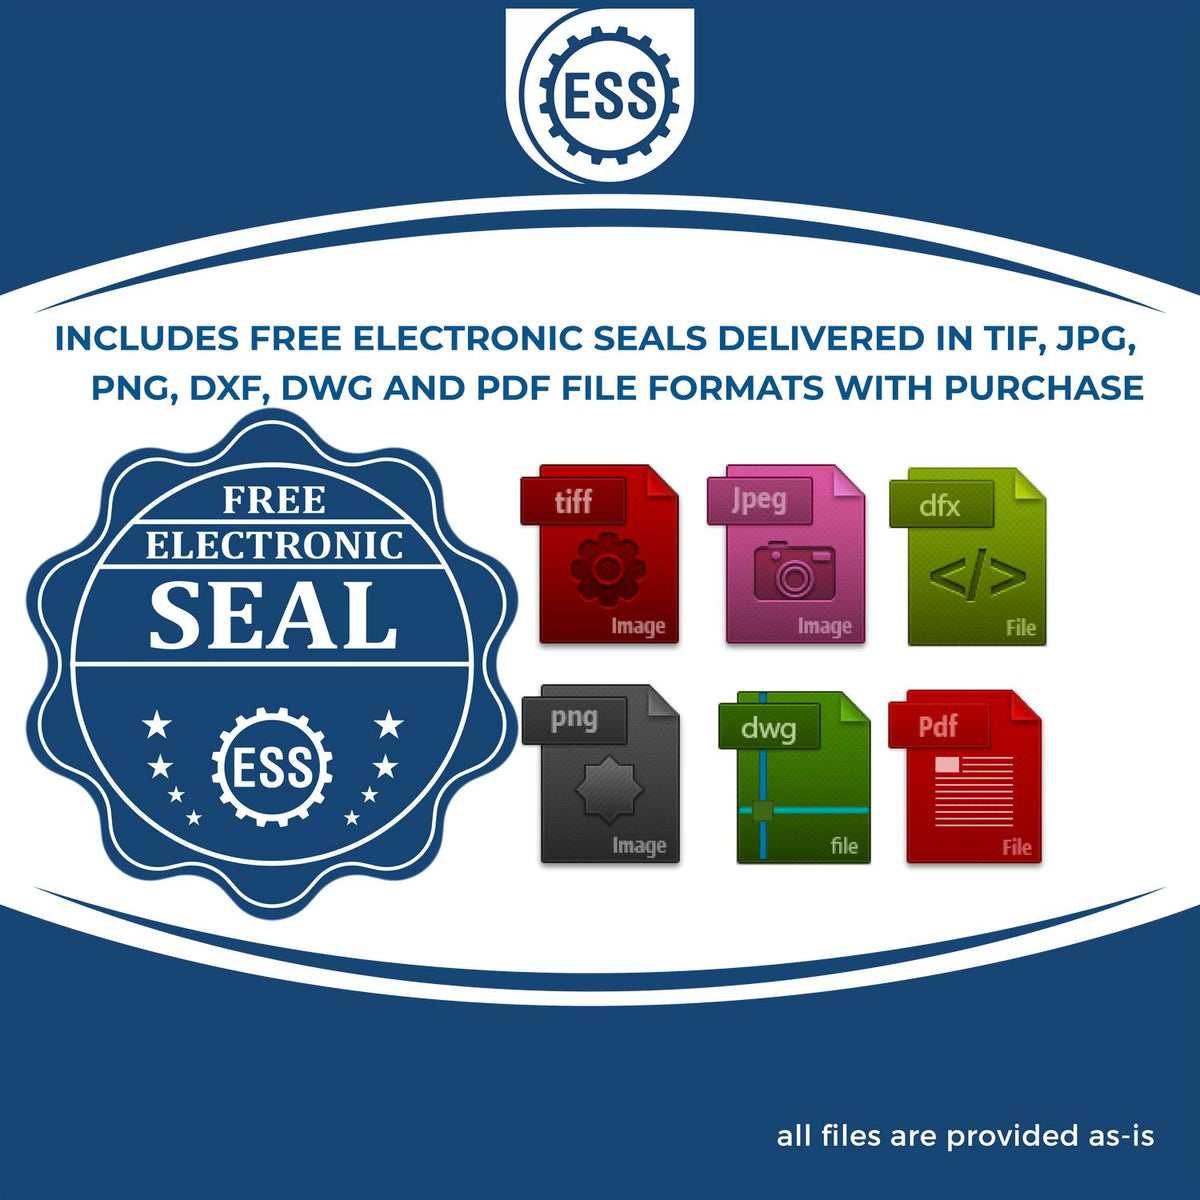 An infographic for the free electronic seal for the Wooden Handle Alaska State Seal Notary Public Stamp illustrating the different file type icons such as DXF, DWG, TIF, JPG and PNG.